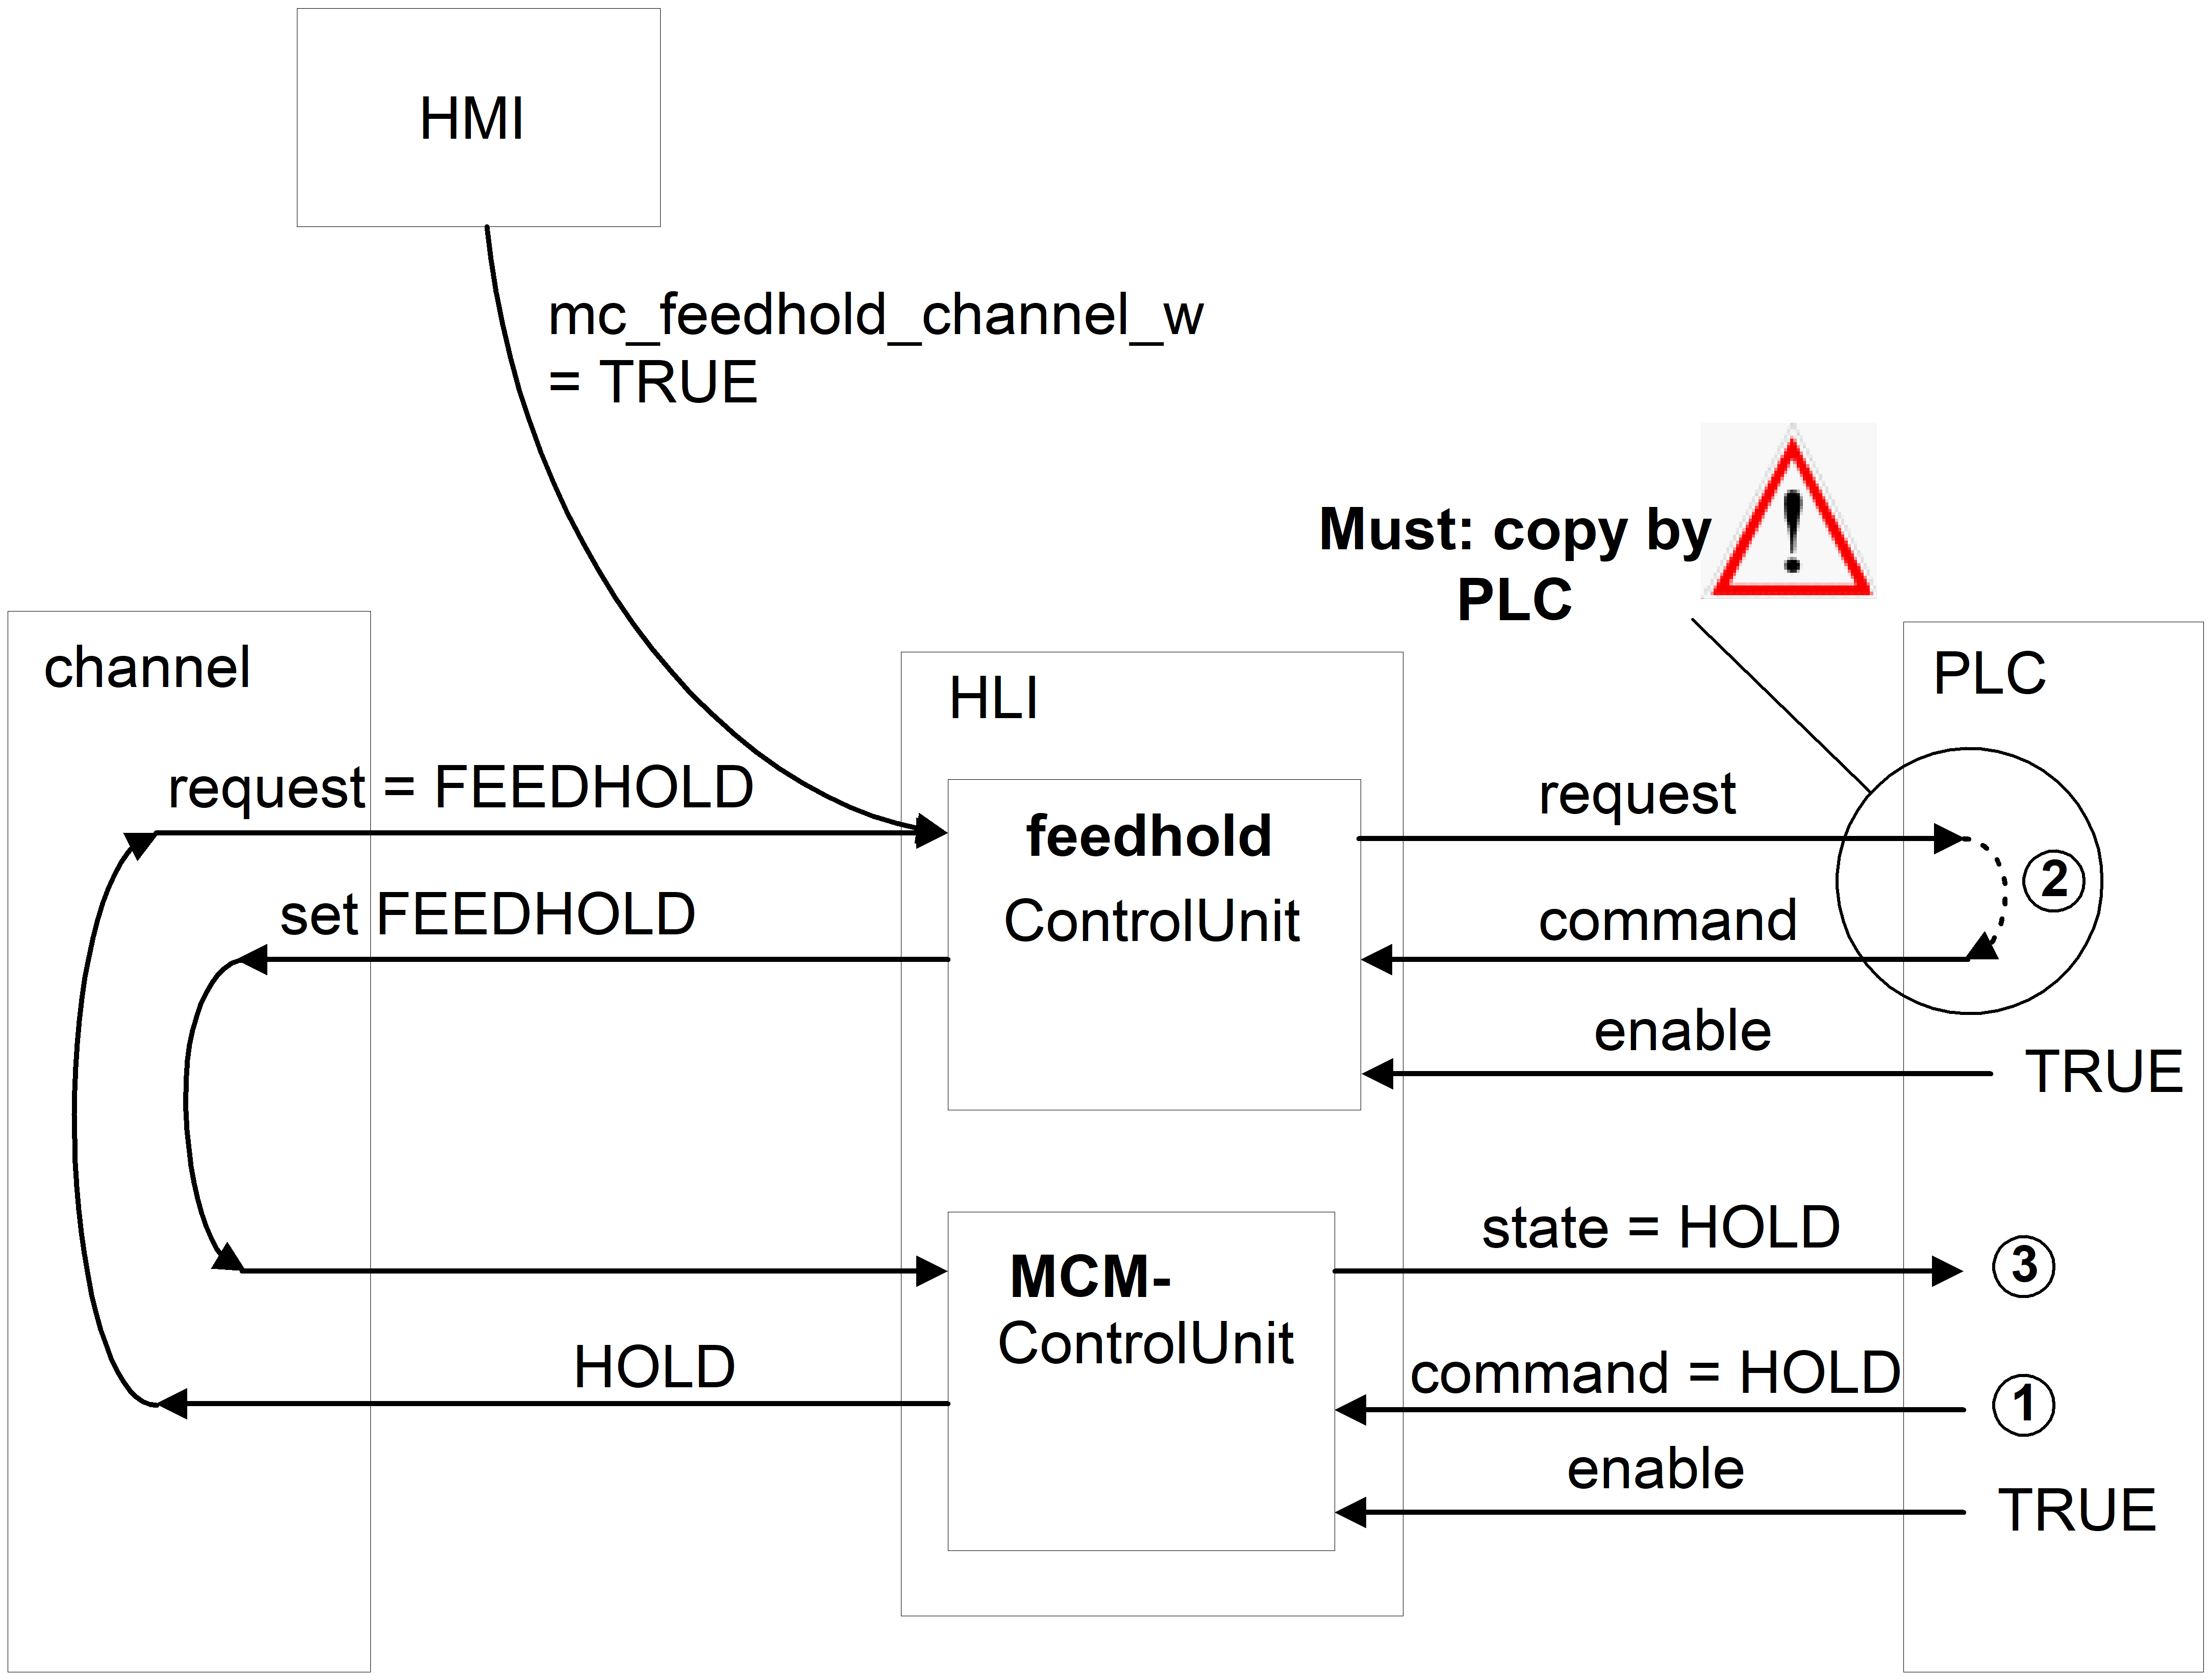 Interaction between feedhold and NC channel stop